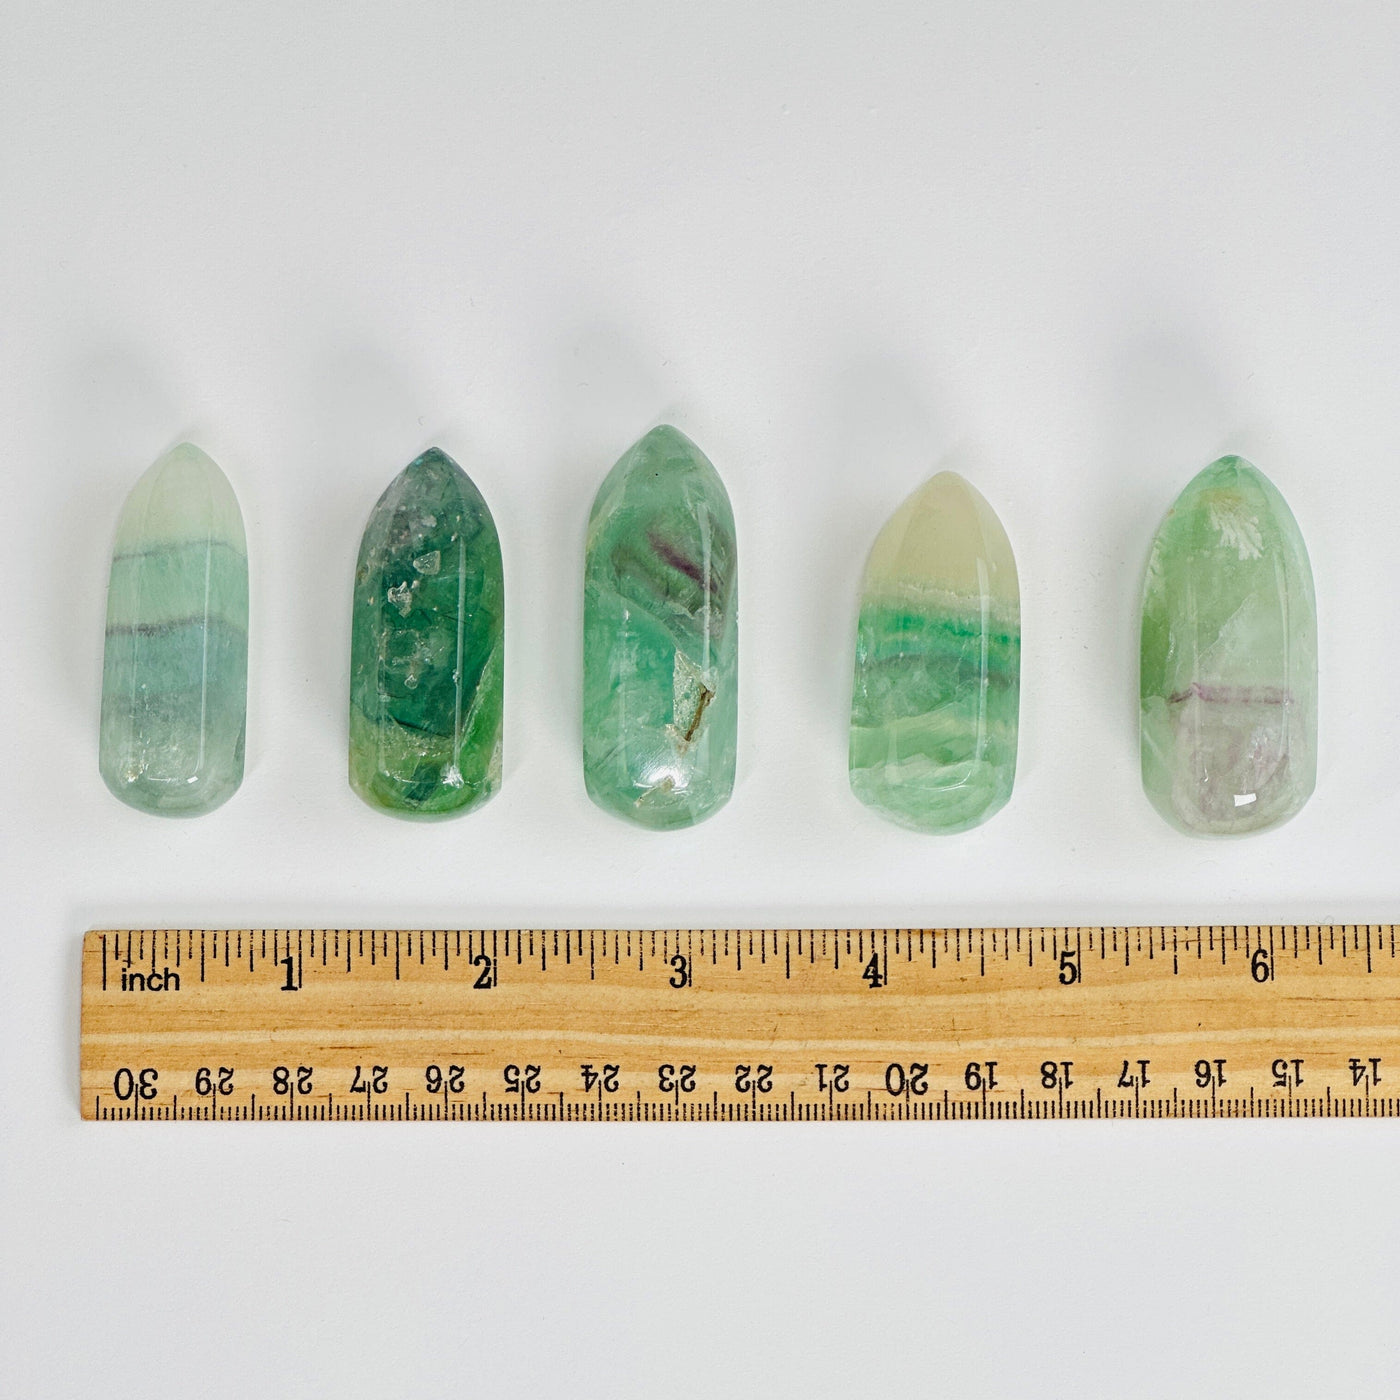 5 fluorite massage points next to a ruler for size reference